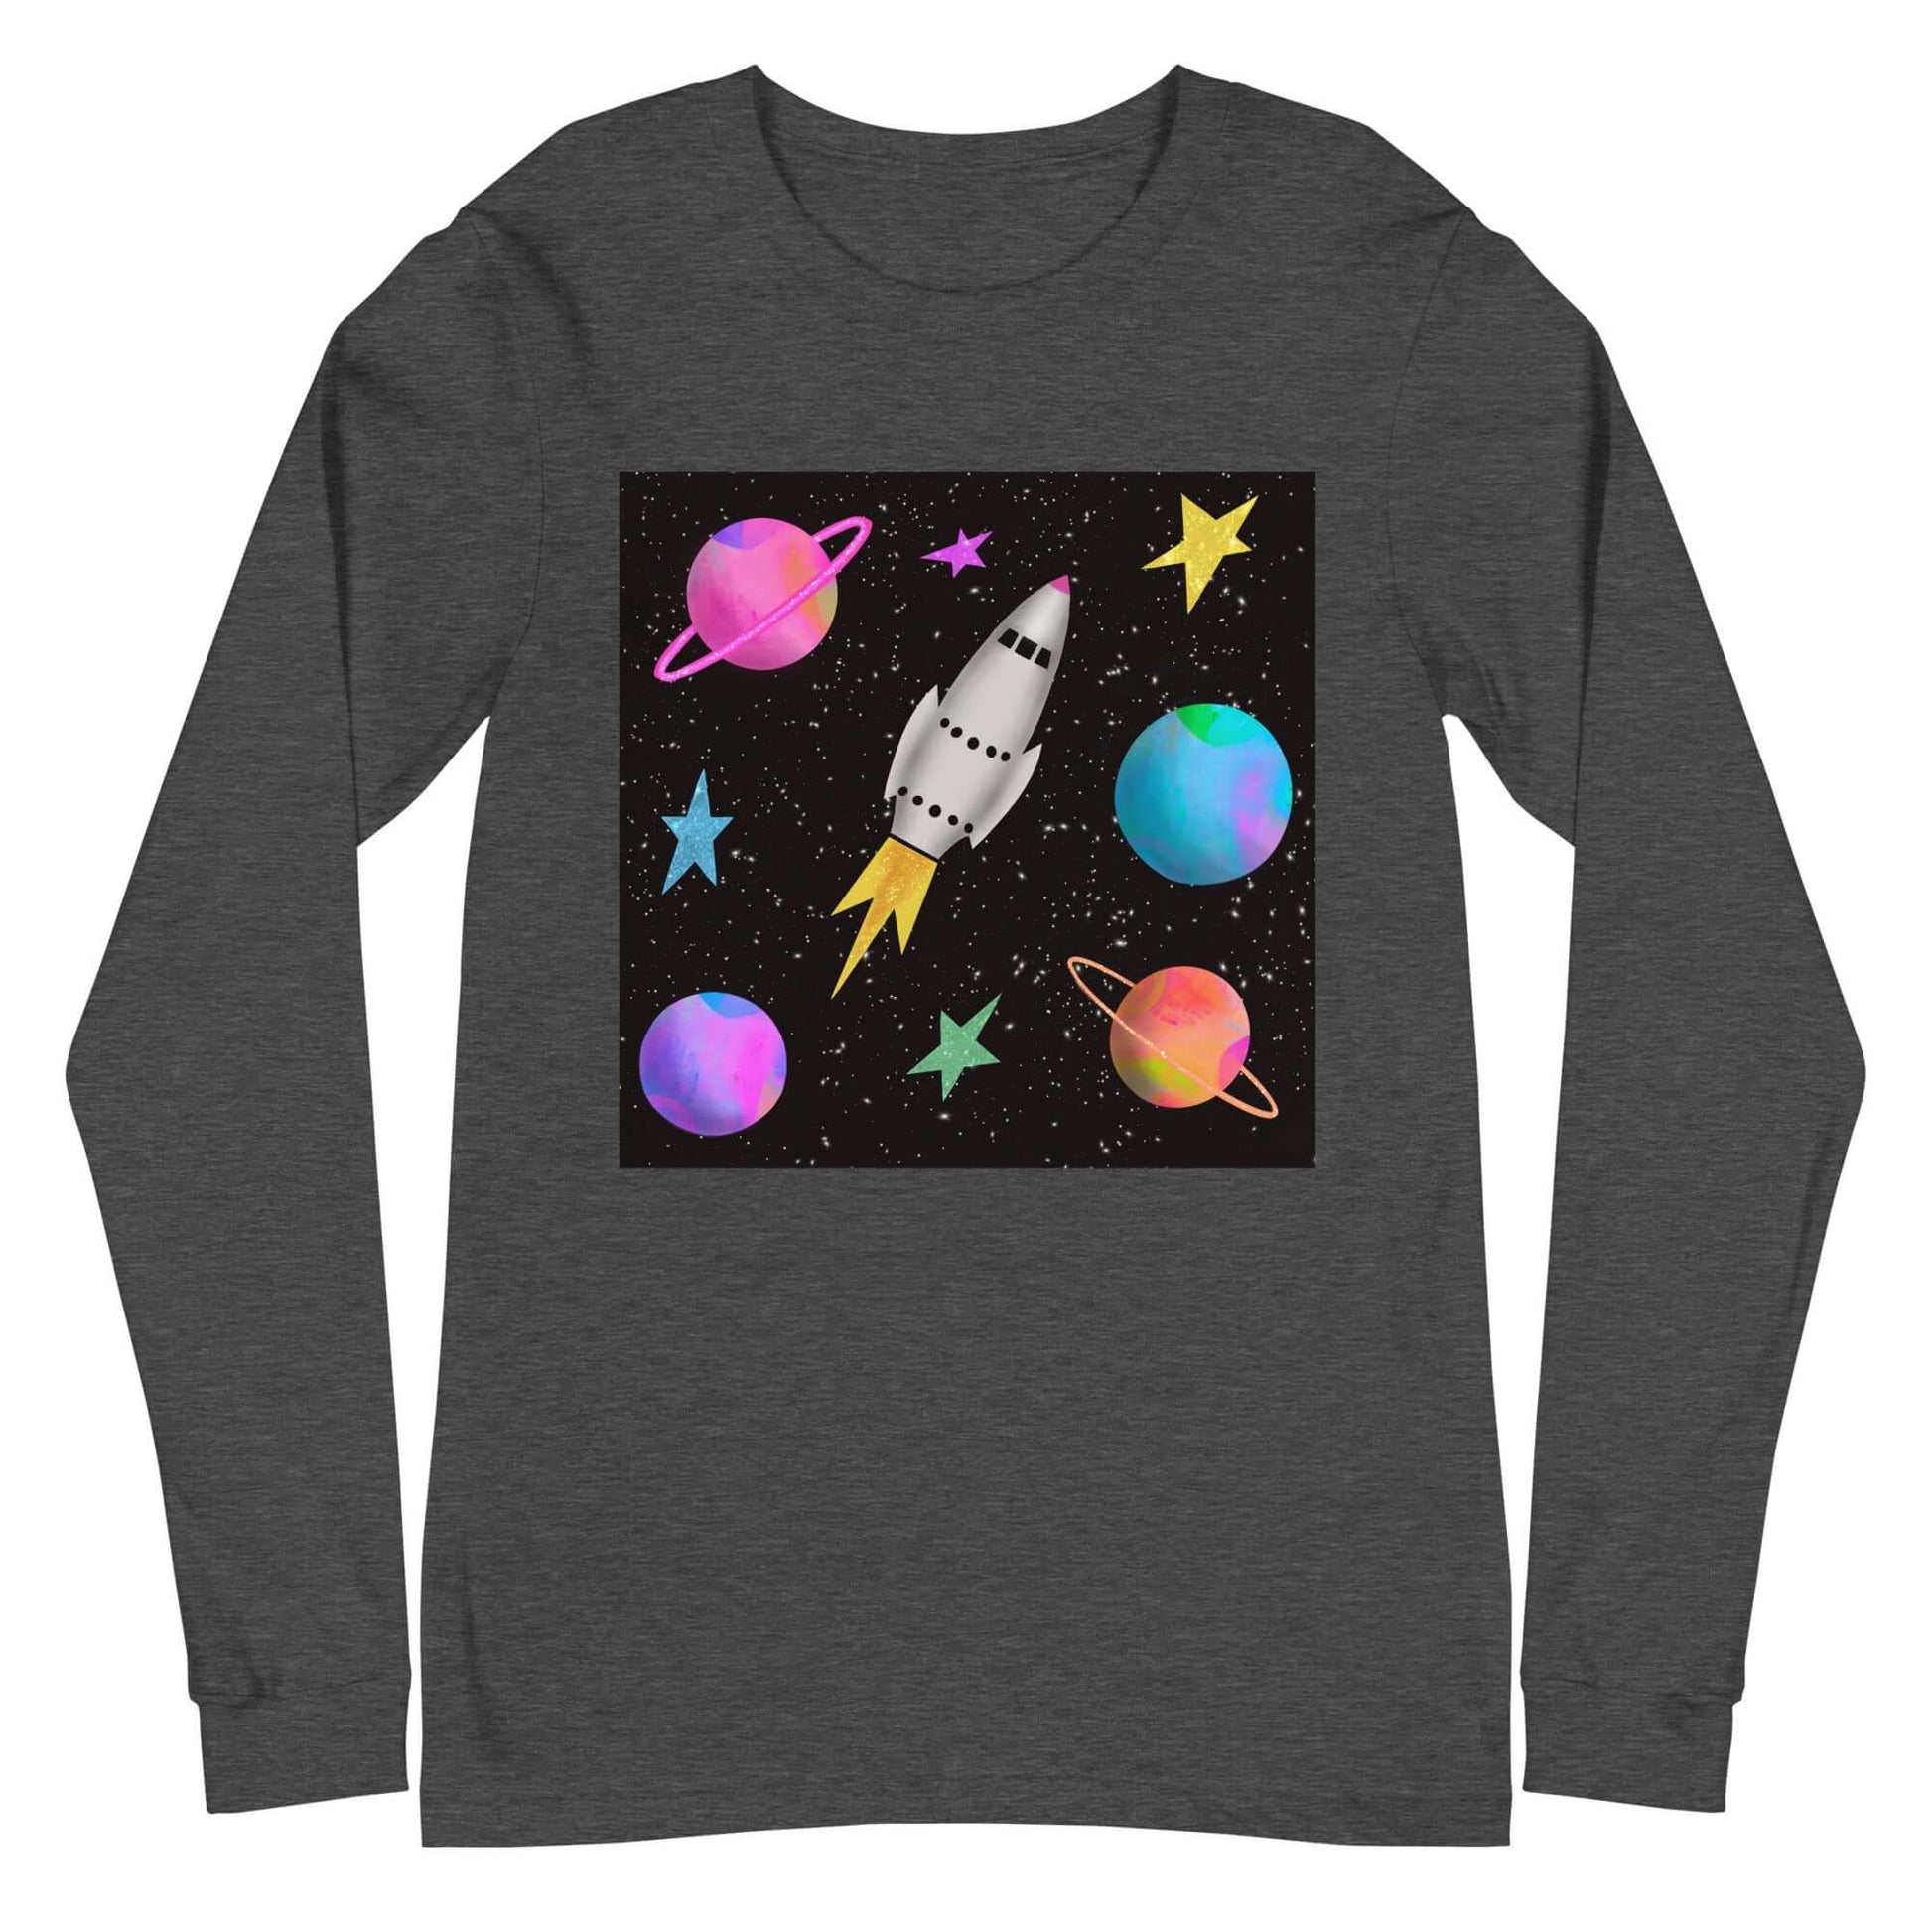 Whimsical Space Rocket with Colorful Planets and Stars on Black Background “Space Rockets” Unisex Long Sleeve Tee in Dark Gray Heather